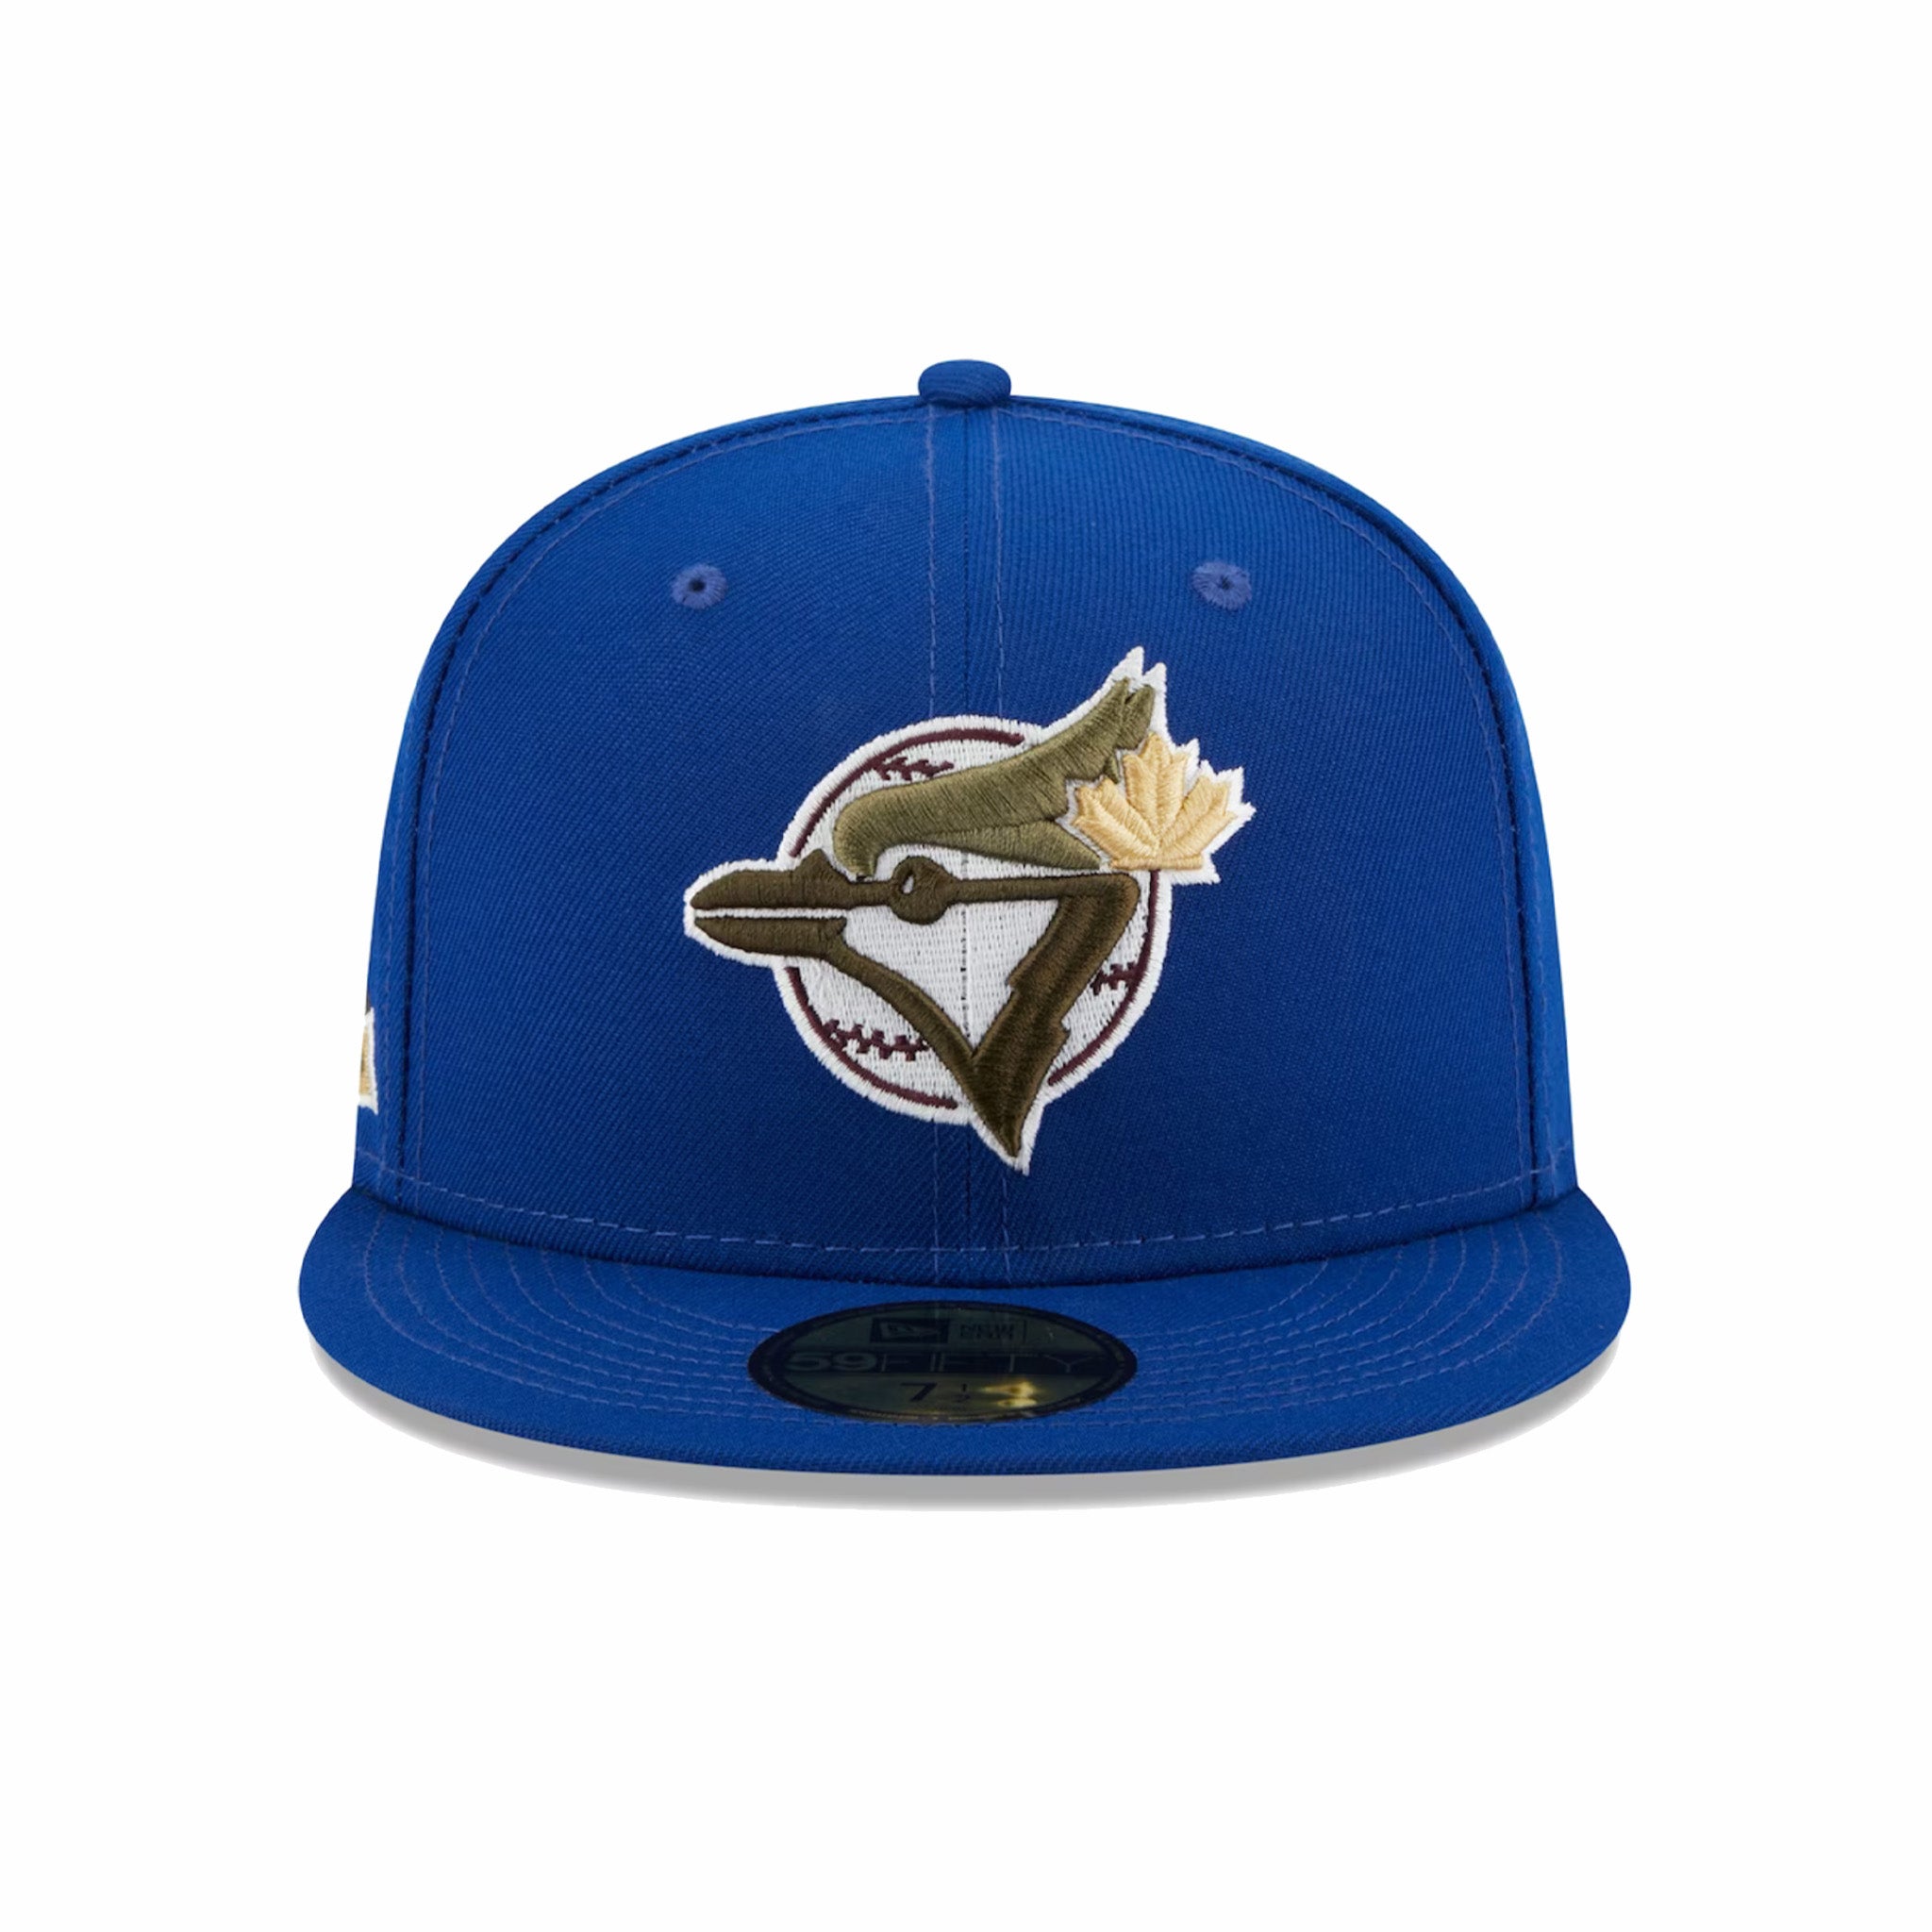 Toronto Blue Jays New Era Authentic Collection On-Field 59FIFTY Fitted Hat - White/Royal 7 5/8